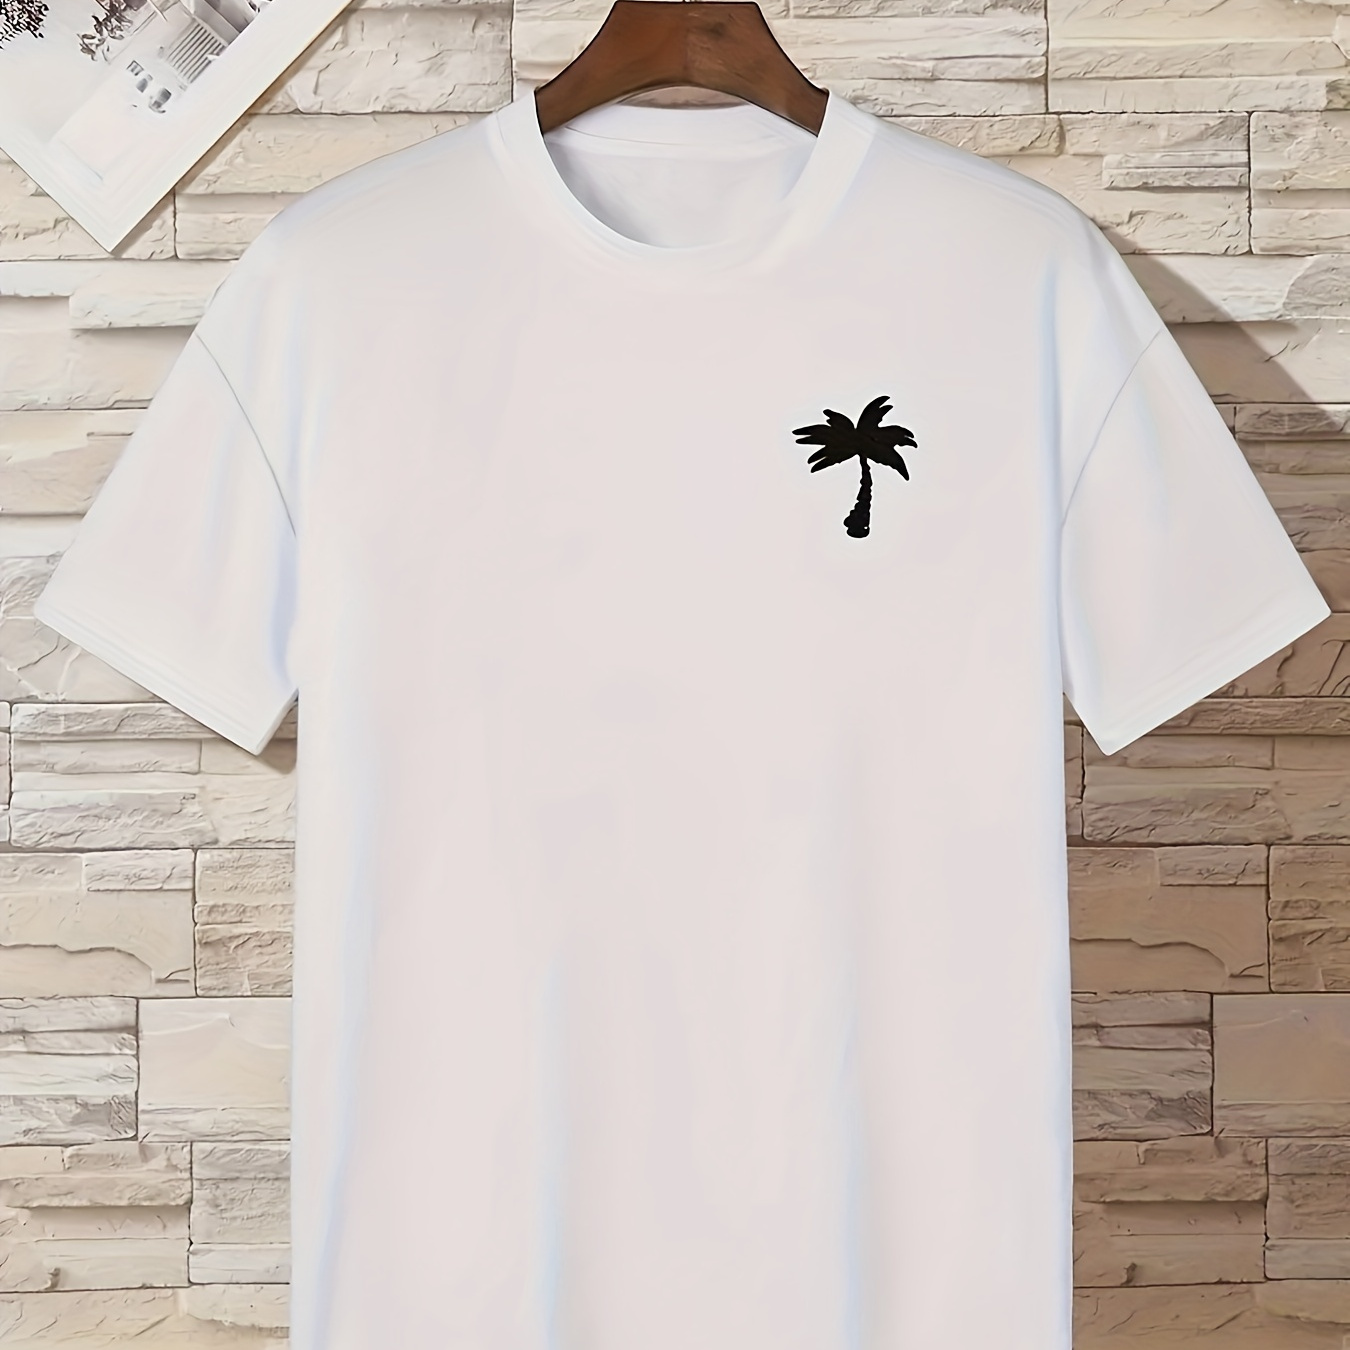 

Simple Palm Print T Shirt, Tees For Kids Boys, Casual Short Sleeve T-shirt For Summer Spring Fall, Tops As Gifts